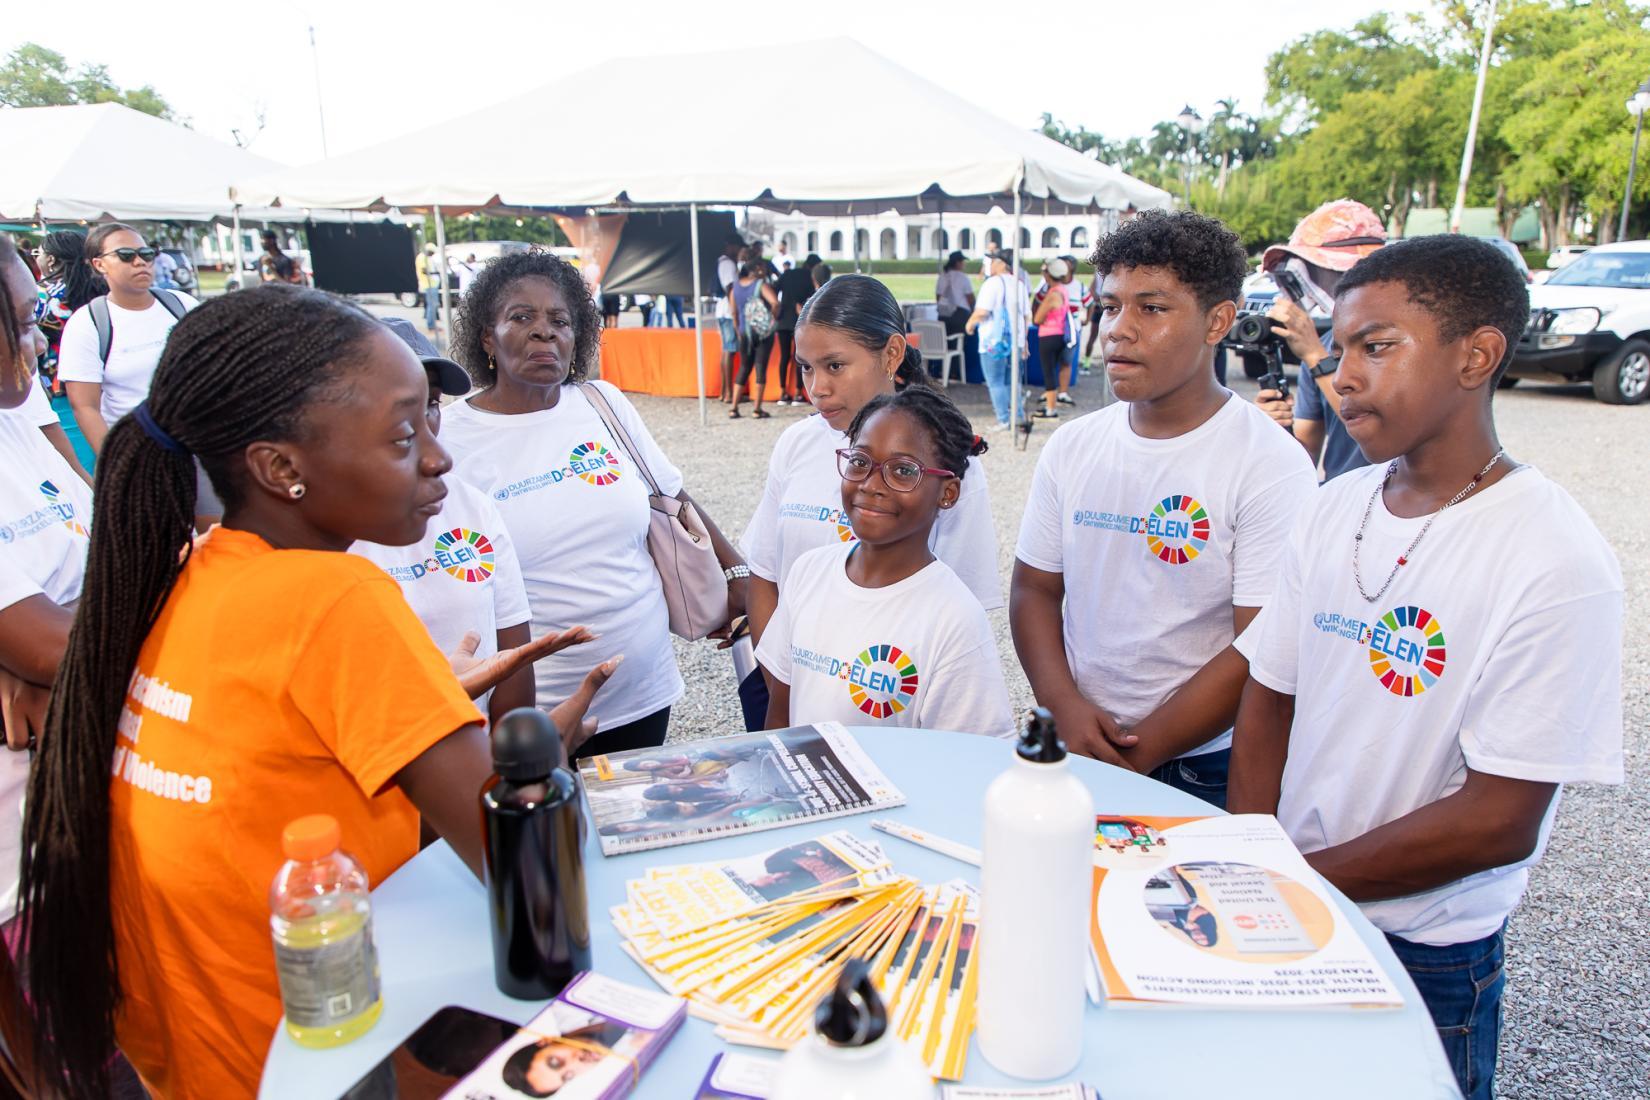 Participants of the SDG Walkathon receive information about the work the UN is doing in Suriname at the UNFPA information booth.